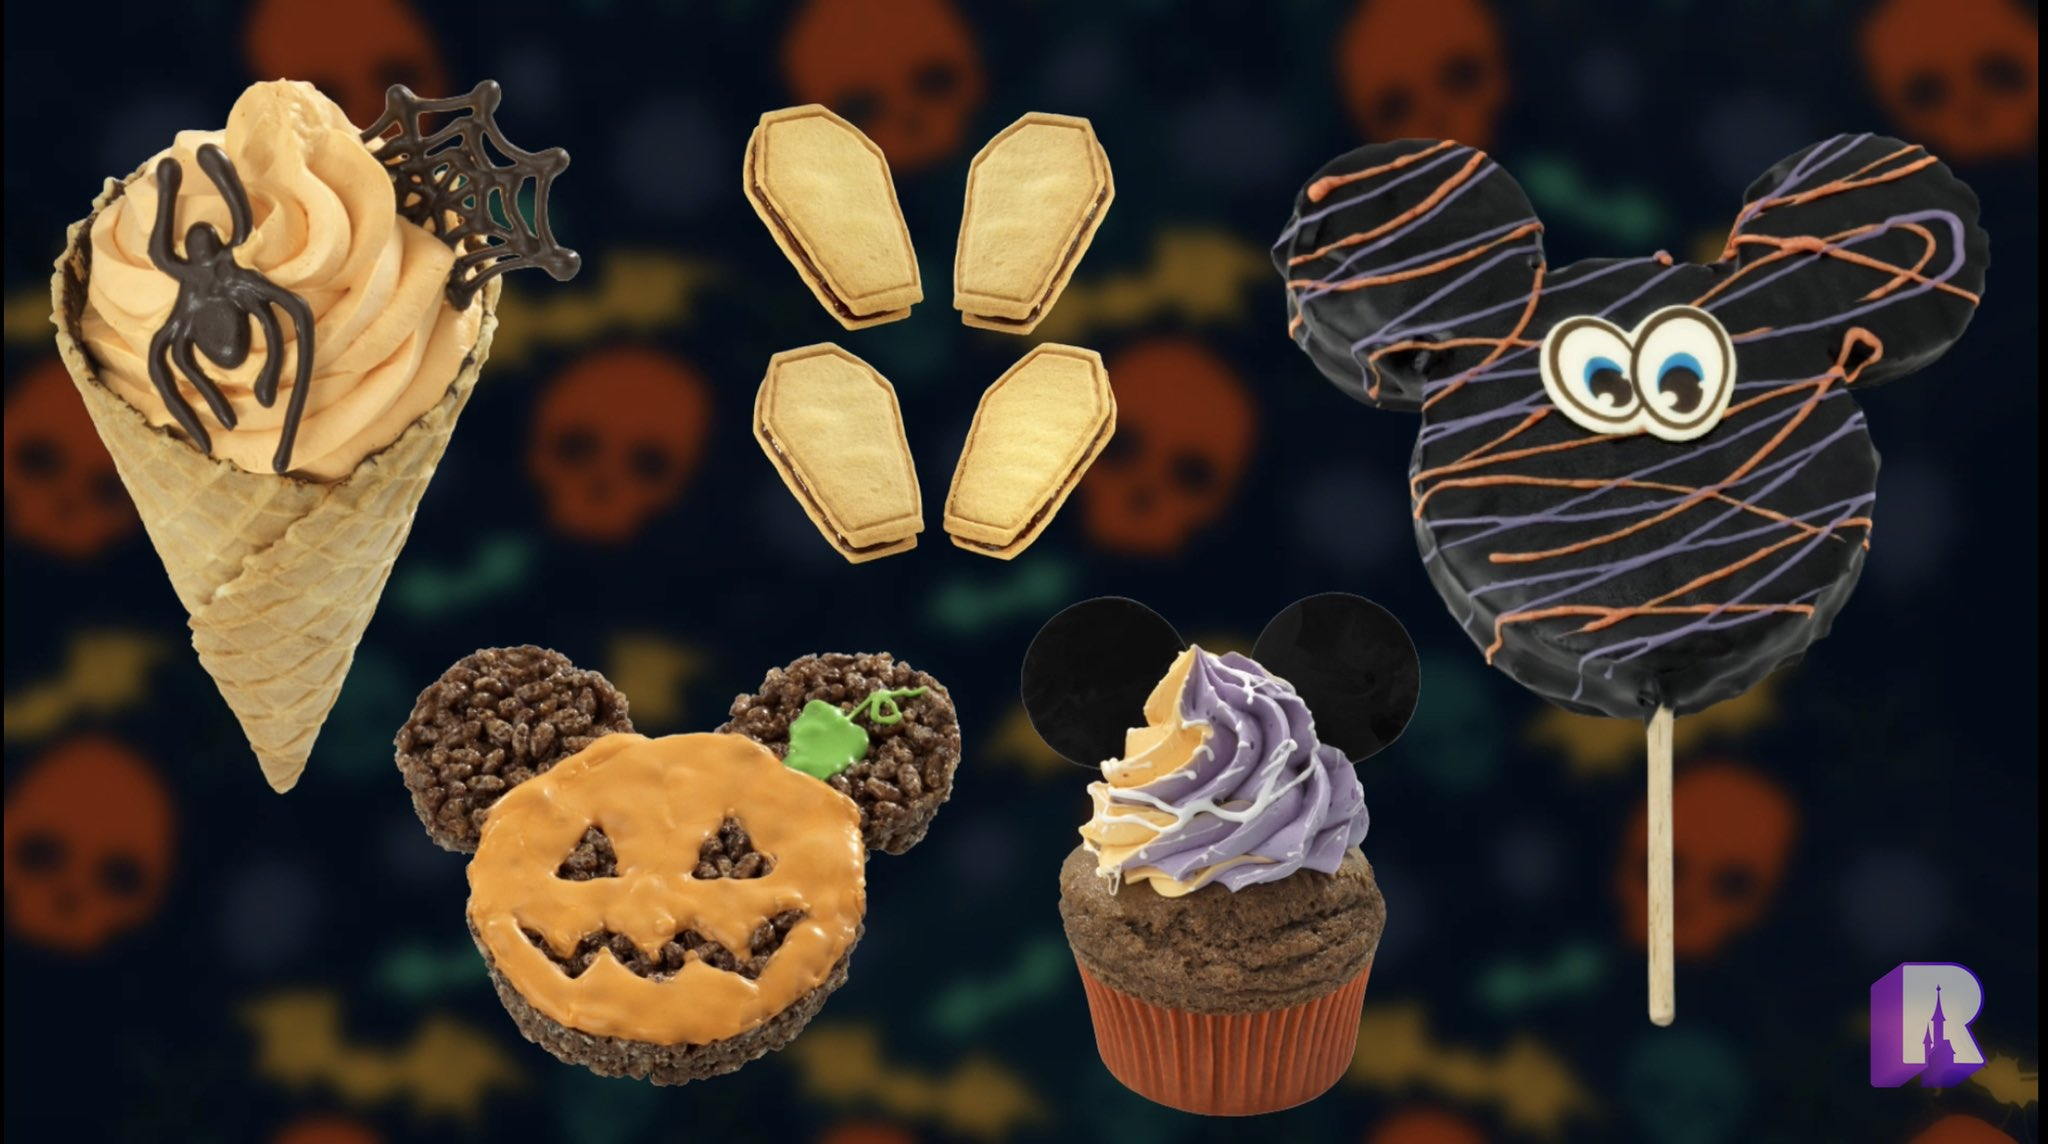 Disneyland Paris Halloween Treats, Snacks and Cocktails Available from 1st October, 2022